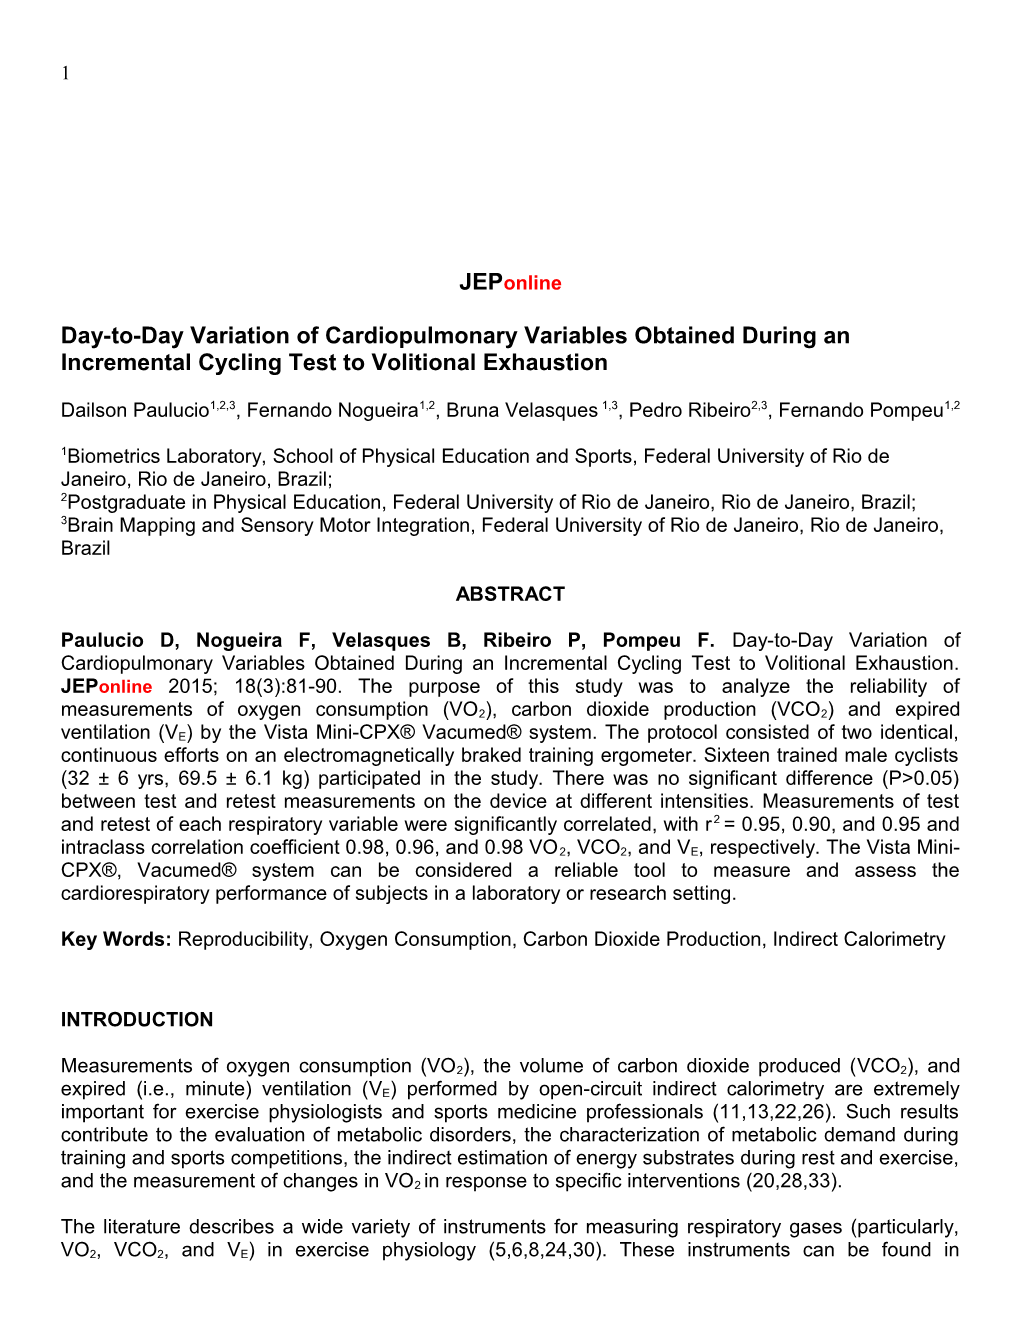 Day-To-Day Variation of Cardiopulmonary Variables Obtained During an Incremental Cycling